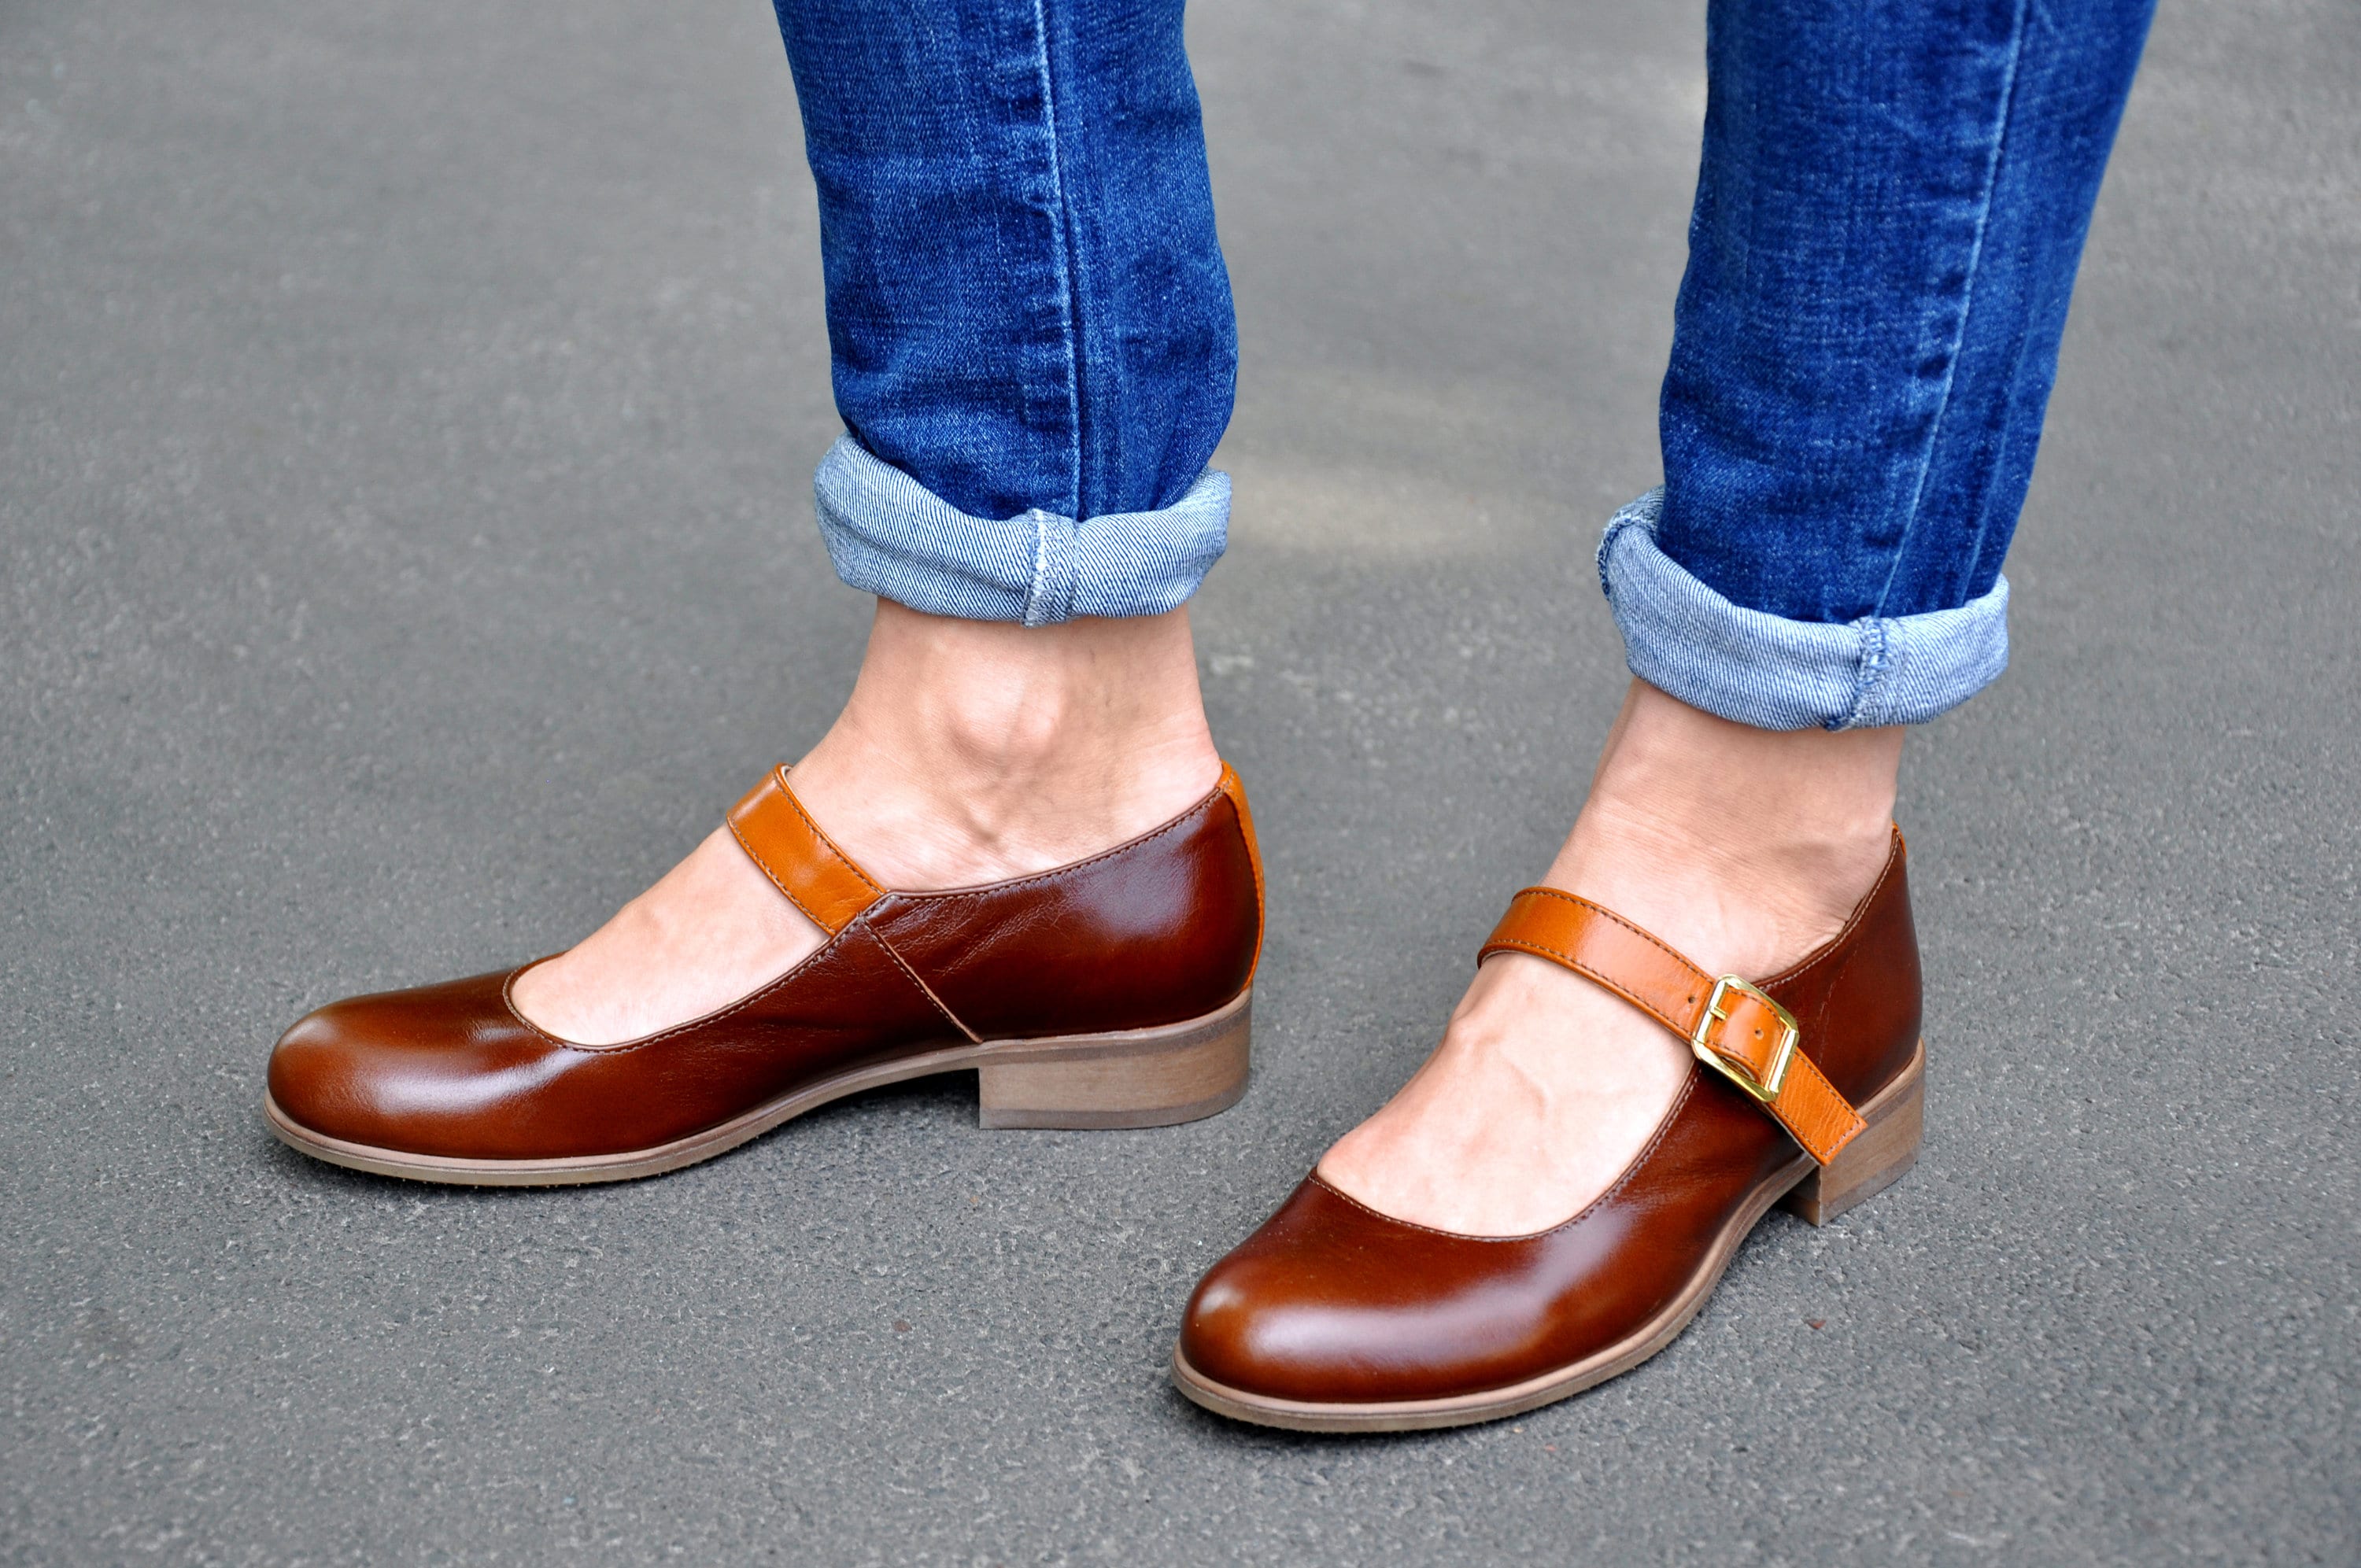 Old-Fashioned Retro Mary Jane Leather Shoes